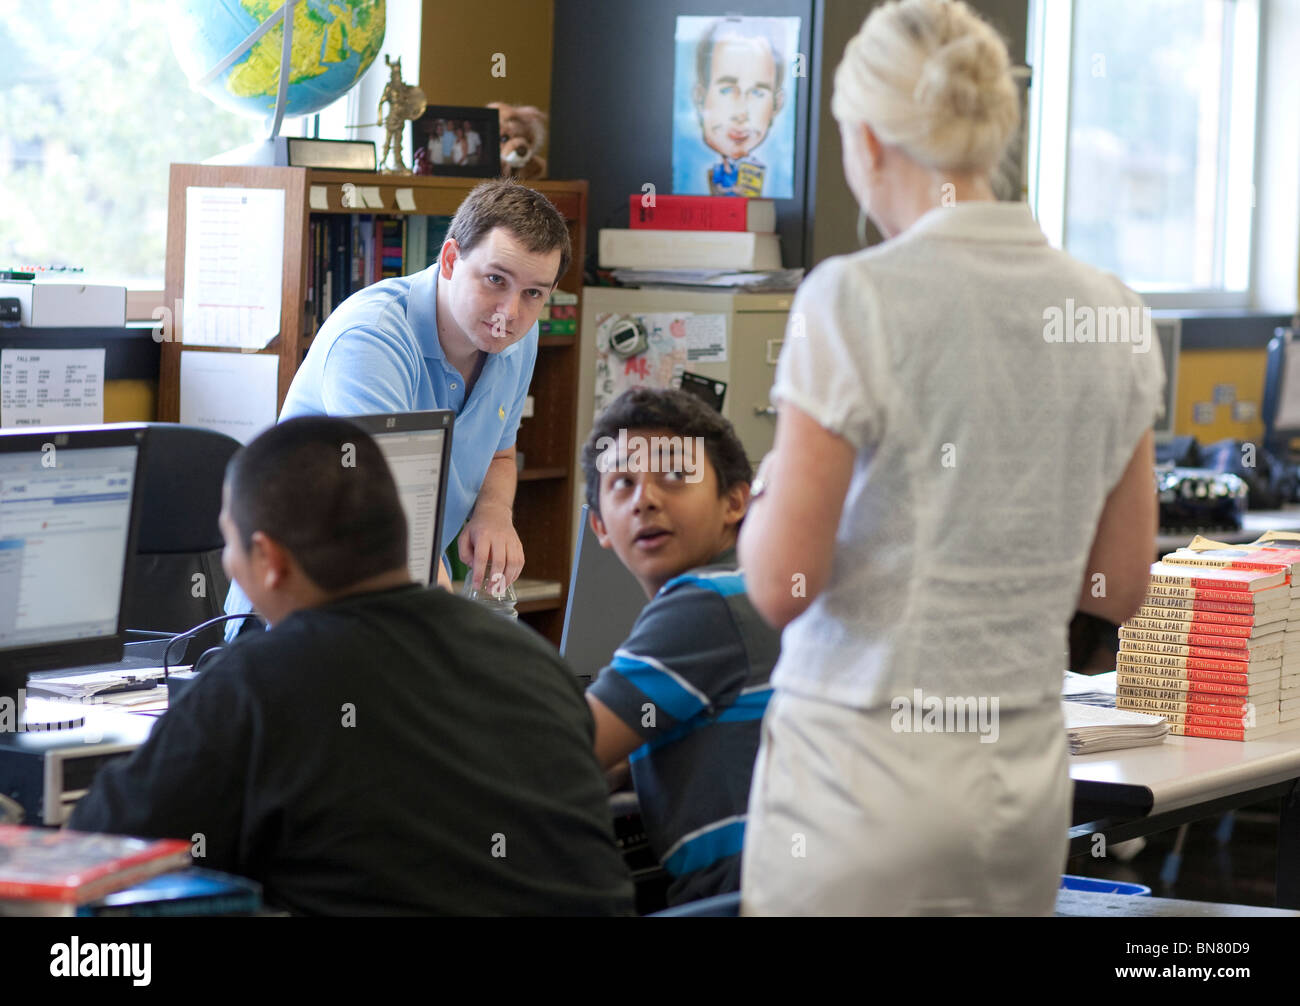 Anglo male and female high school English teachers interact with male student in class. Stock Photo